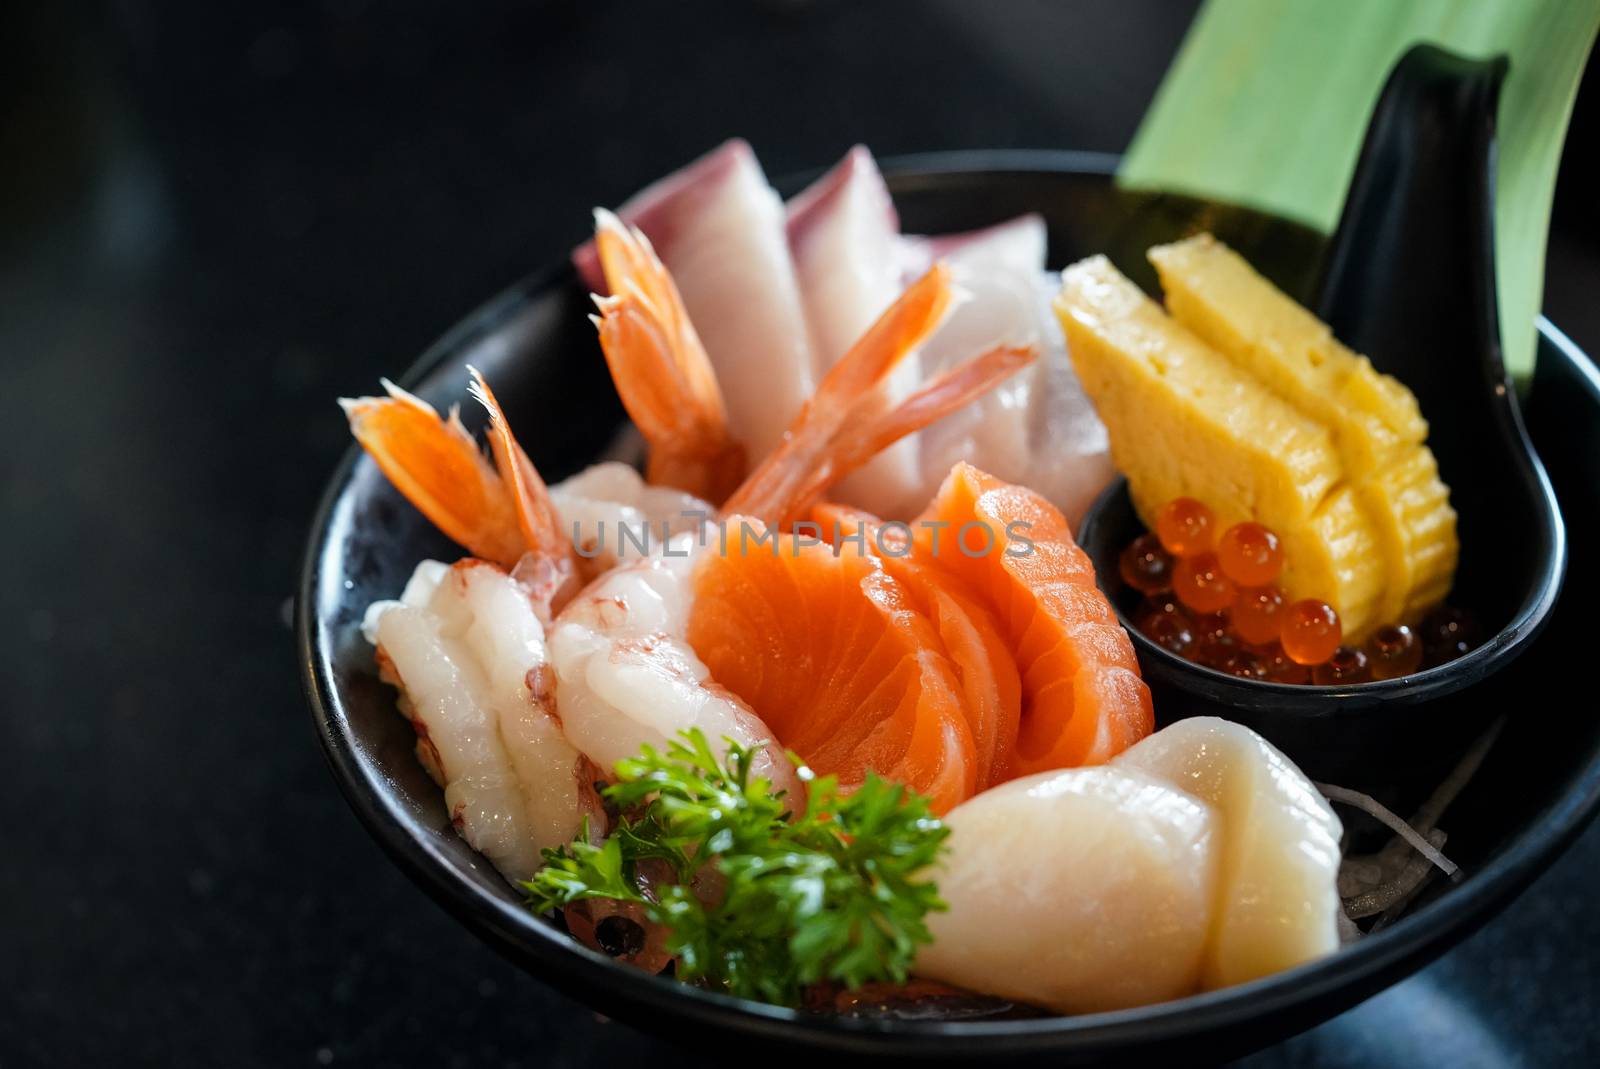 The sashimi set is beautifully arranged in a black plate decorated with green leaves. Japanese Cuisine Buffet. Chef's Choice: Salmon, hamachi, scallops, shrimp, tamagoyaki and flying fish roe.